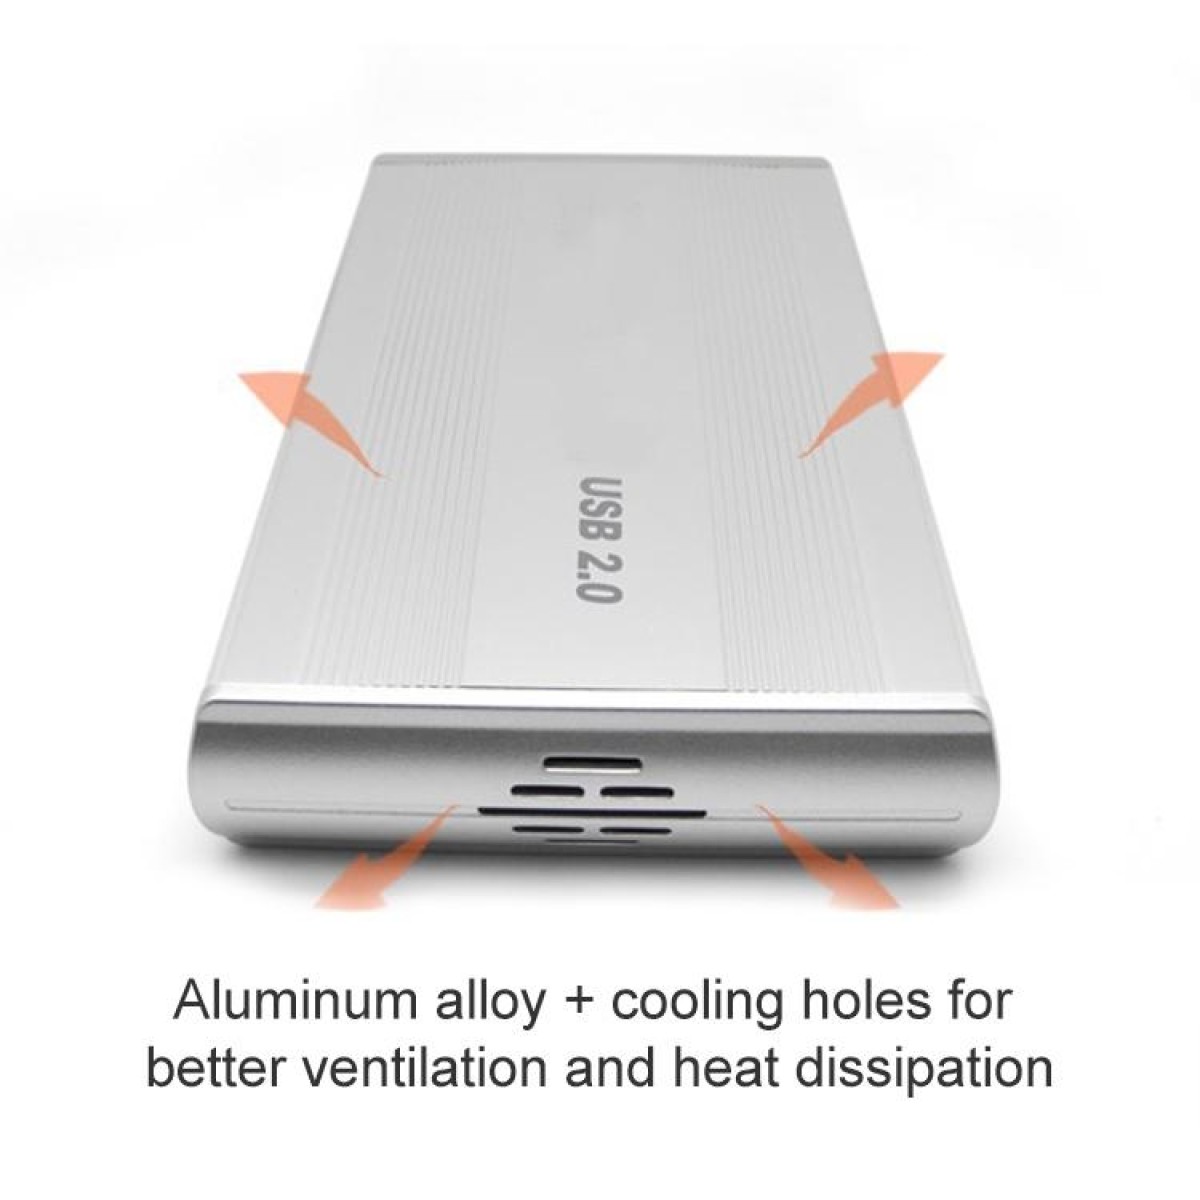 3.5 inch HDD External Case, Support IDE Hard drive(Silver)